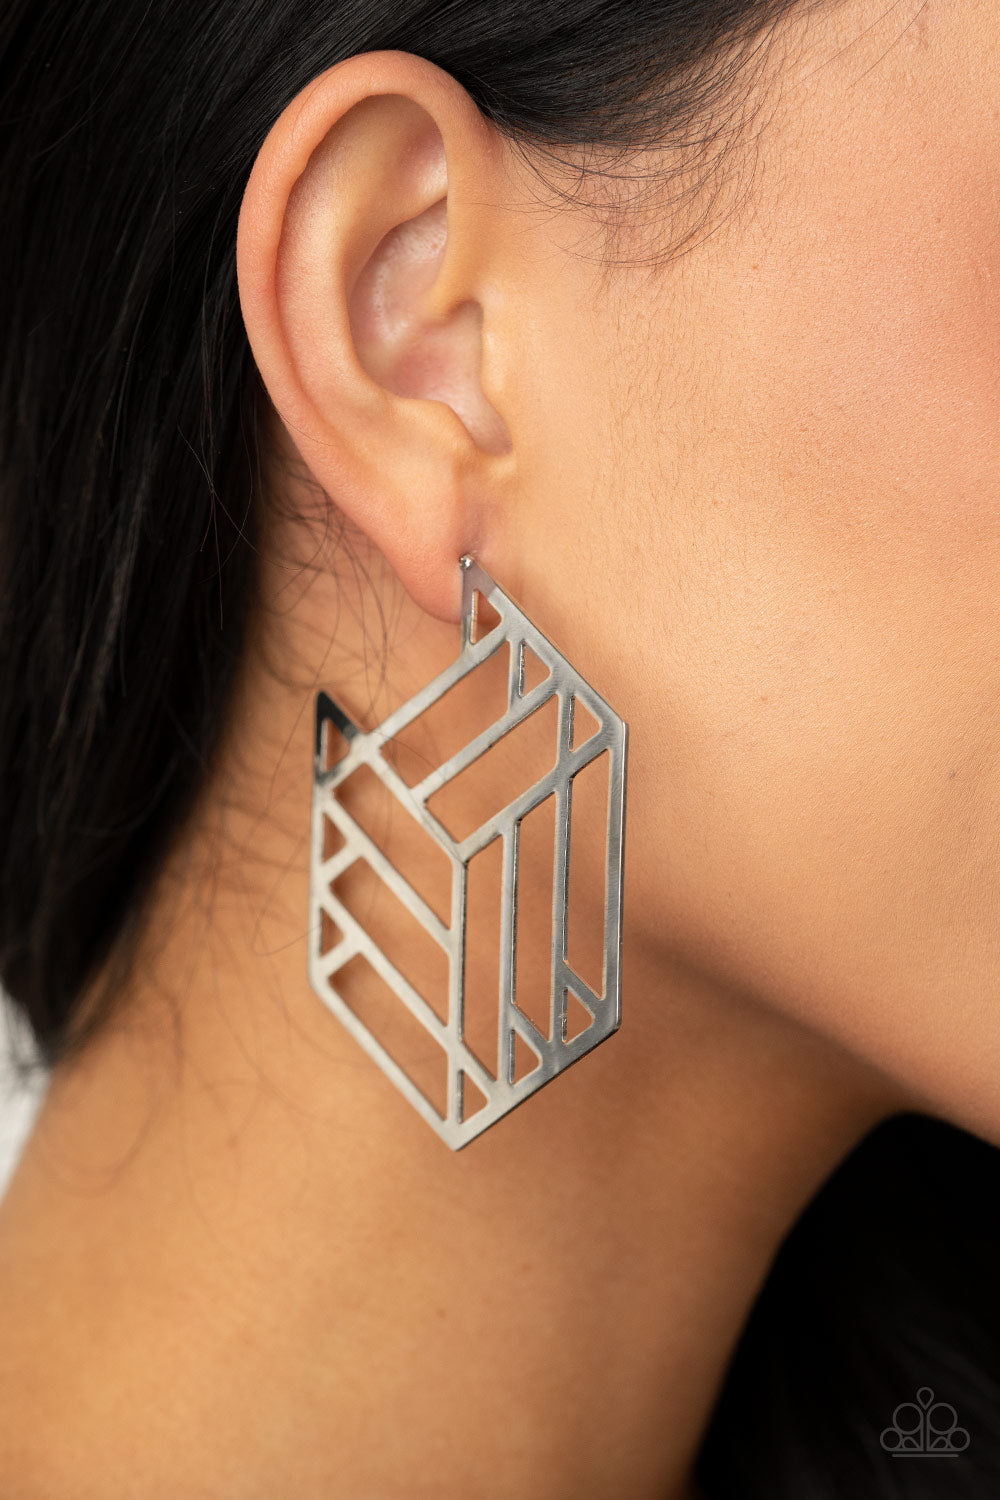 Flat silver bars connect into an edgy hexagonal frame, creating a chic geometric hoop. Earring attaches to a standard post fitting. Hoop measures approximately 2 3/4